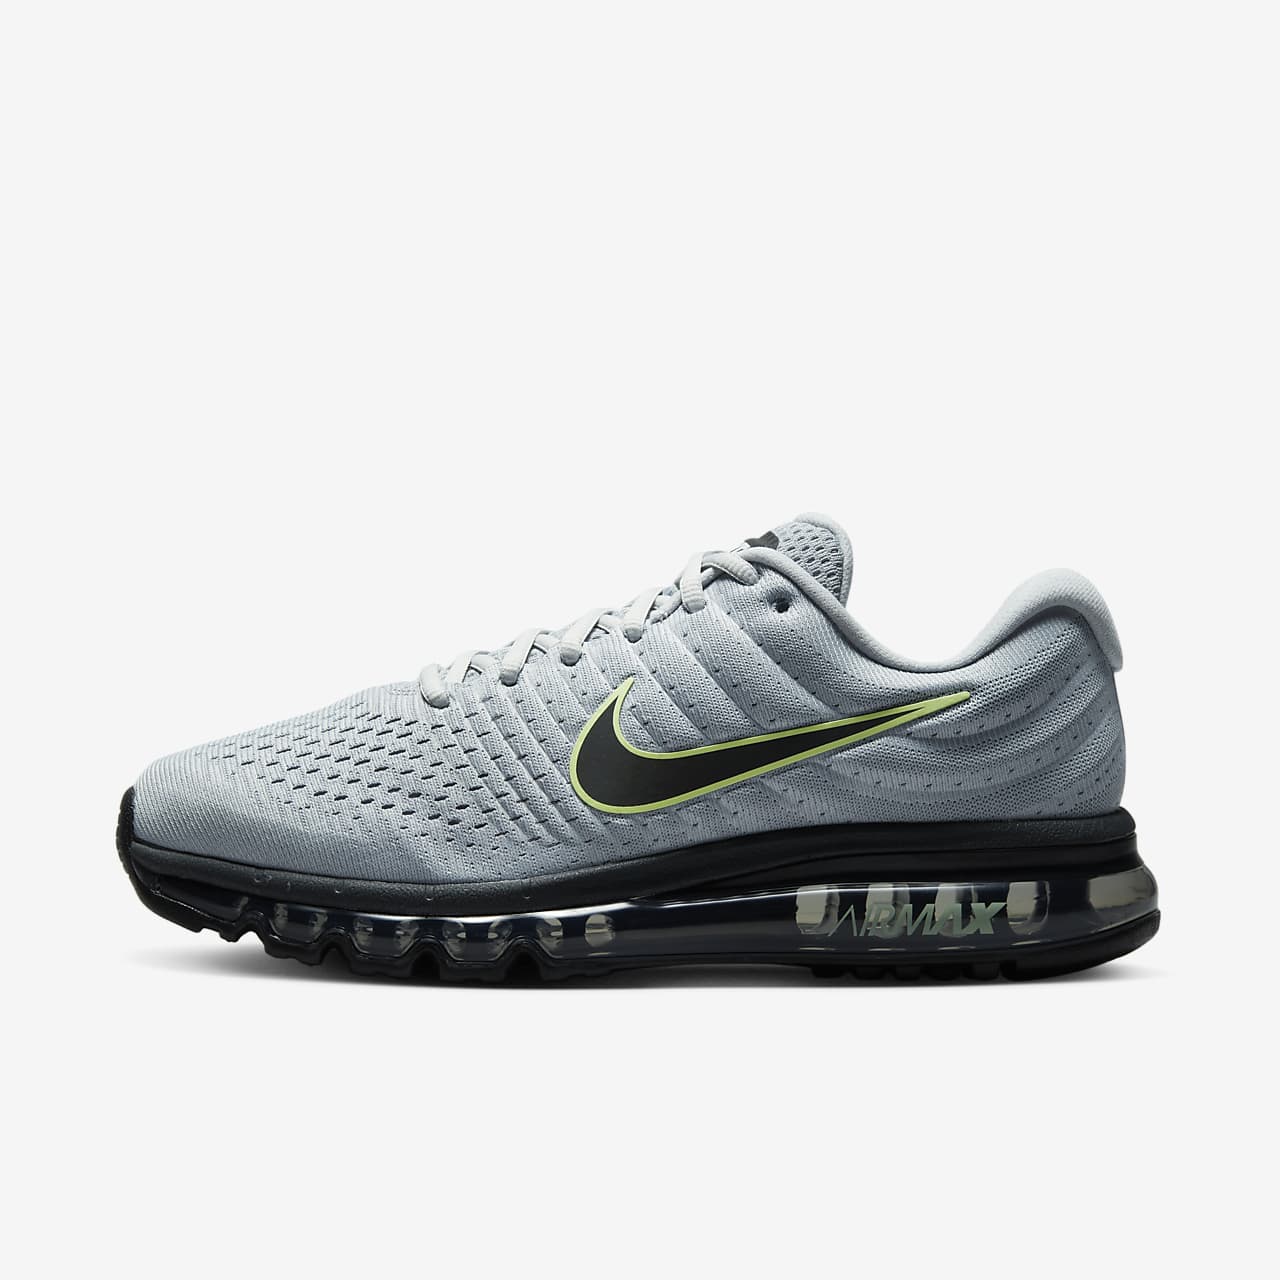 nike air max 2017 review runner's world